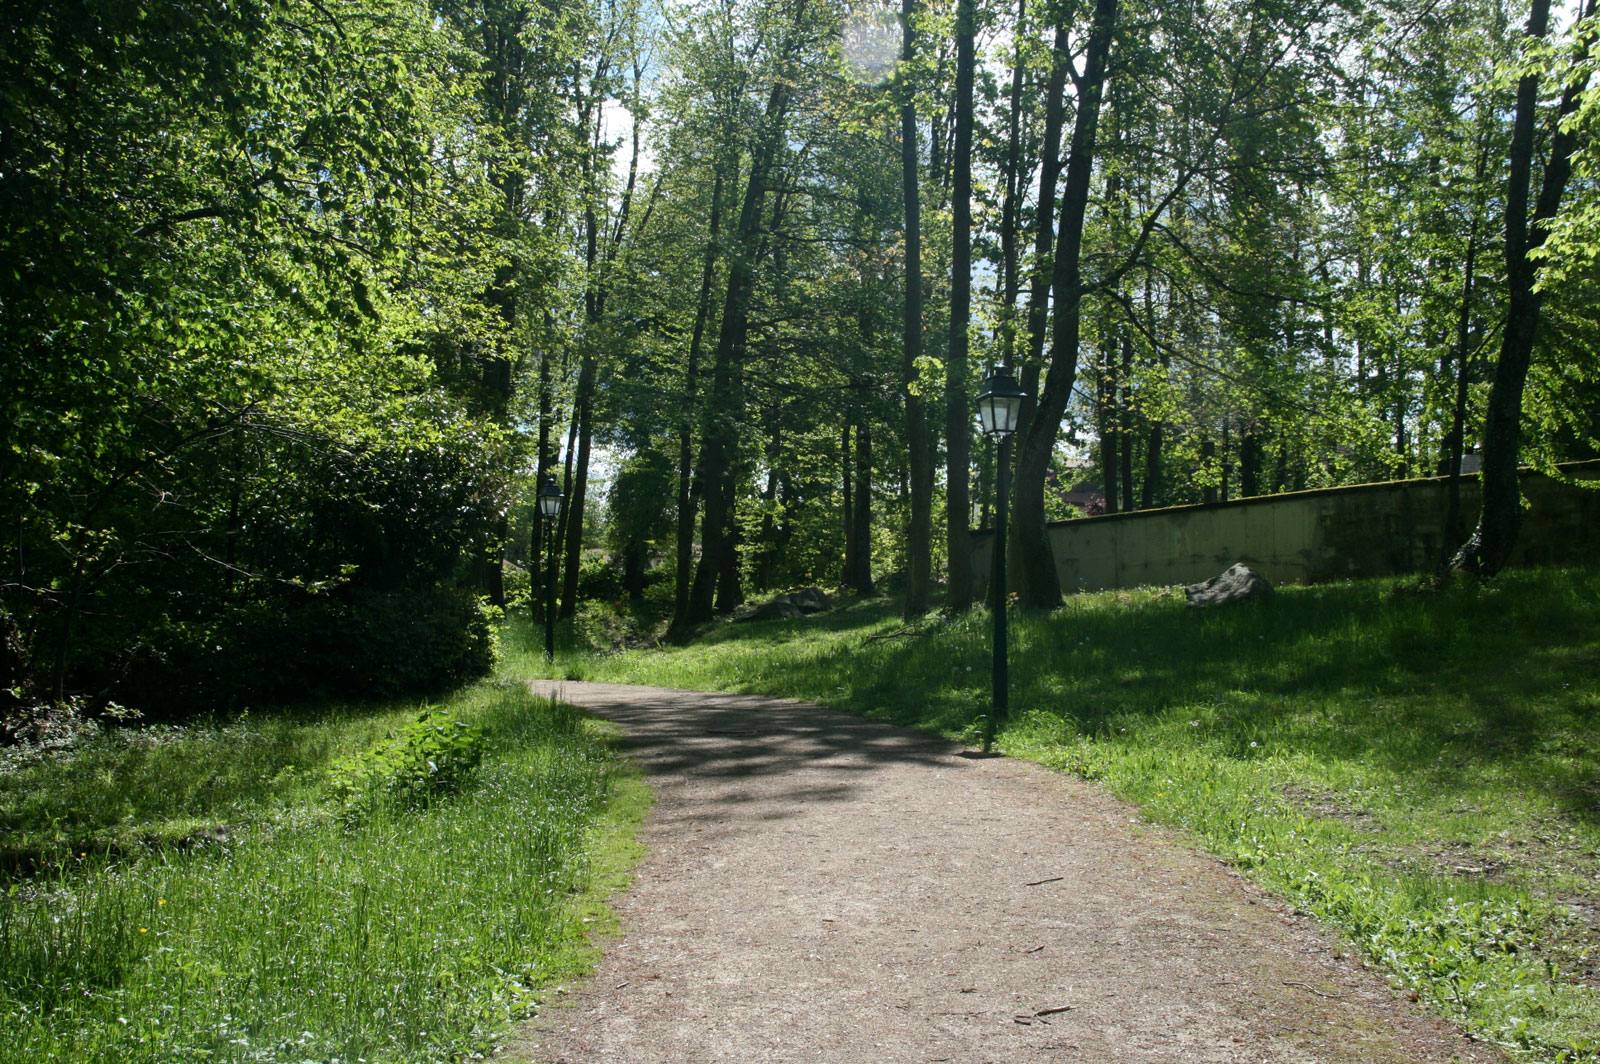 Yvoire, the green lane to go to Rovorée